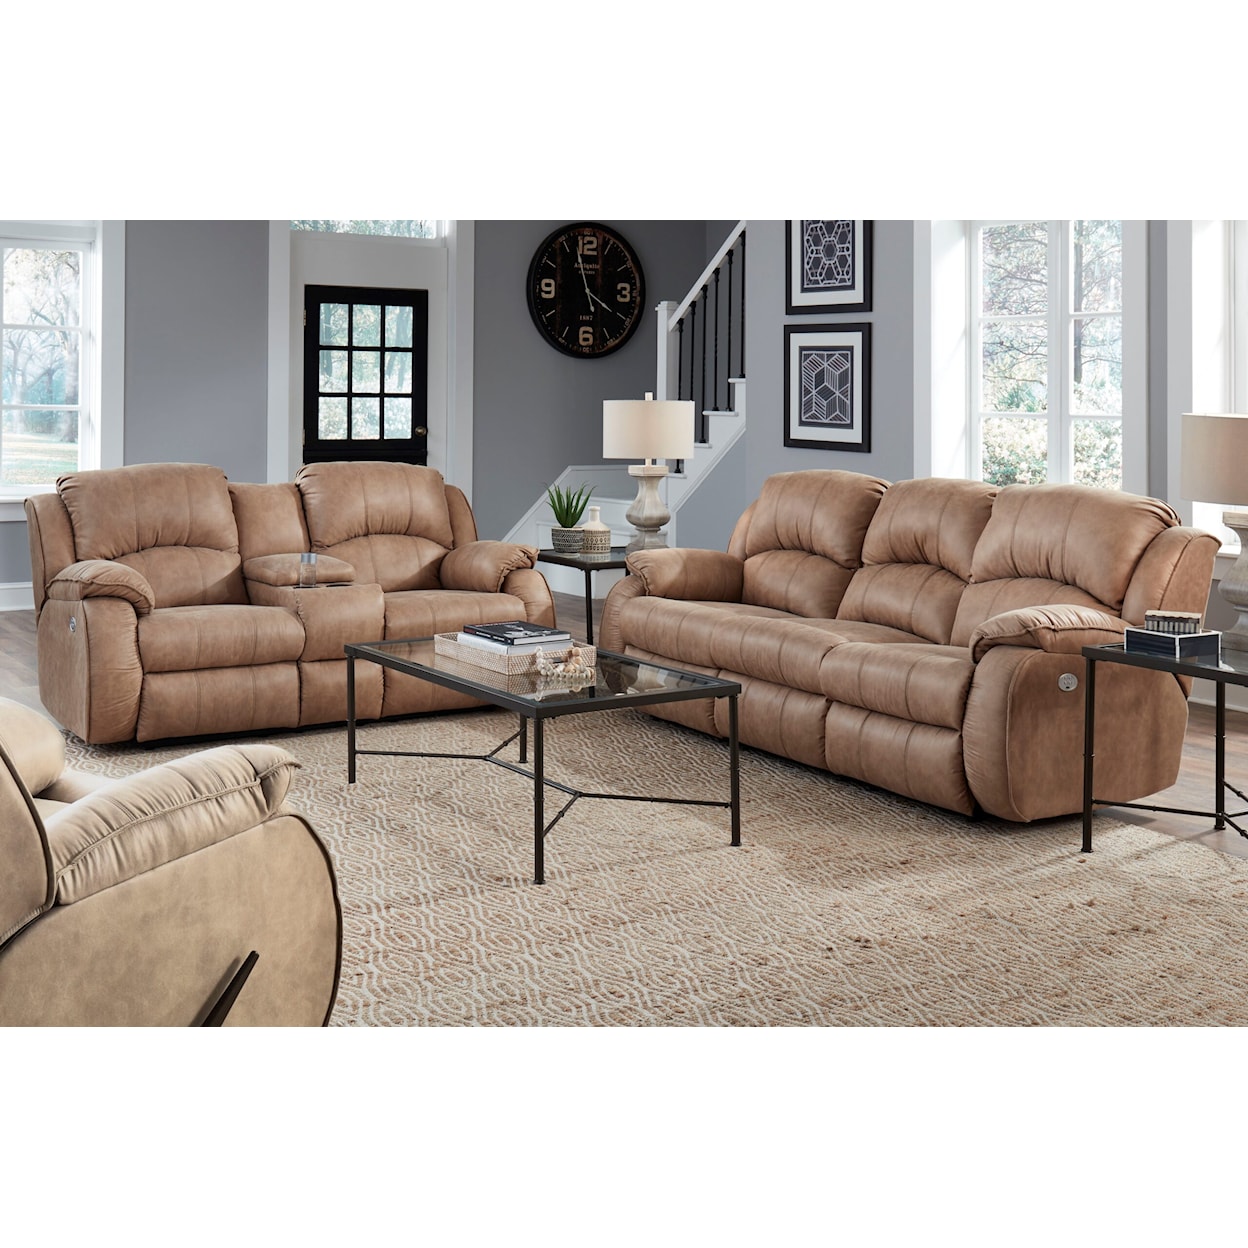 Southern Motion Cagney Power Reclining Console Sofa